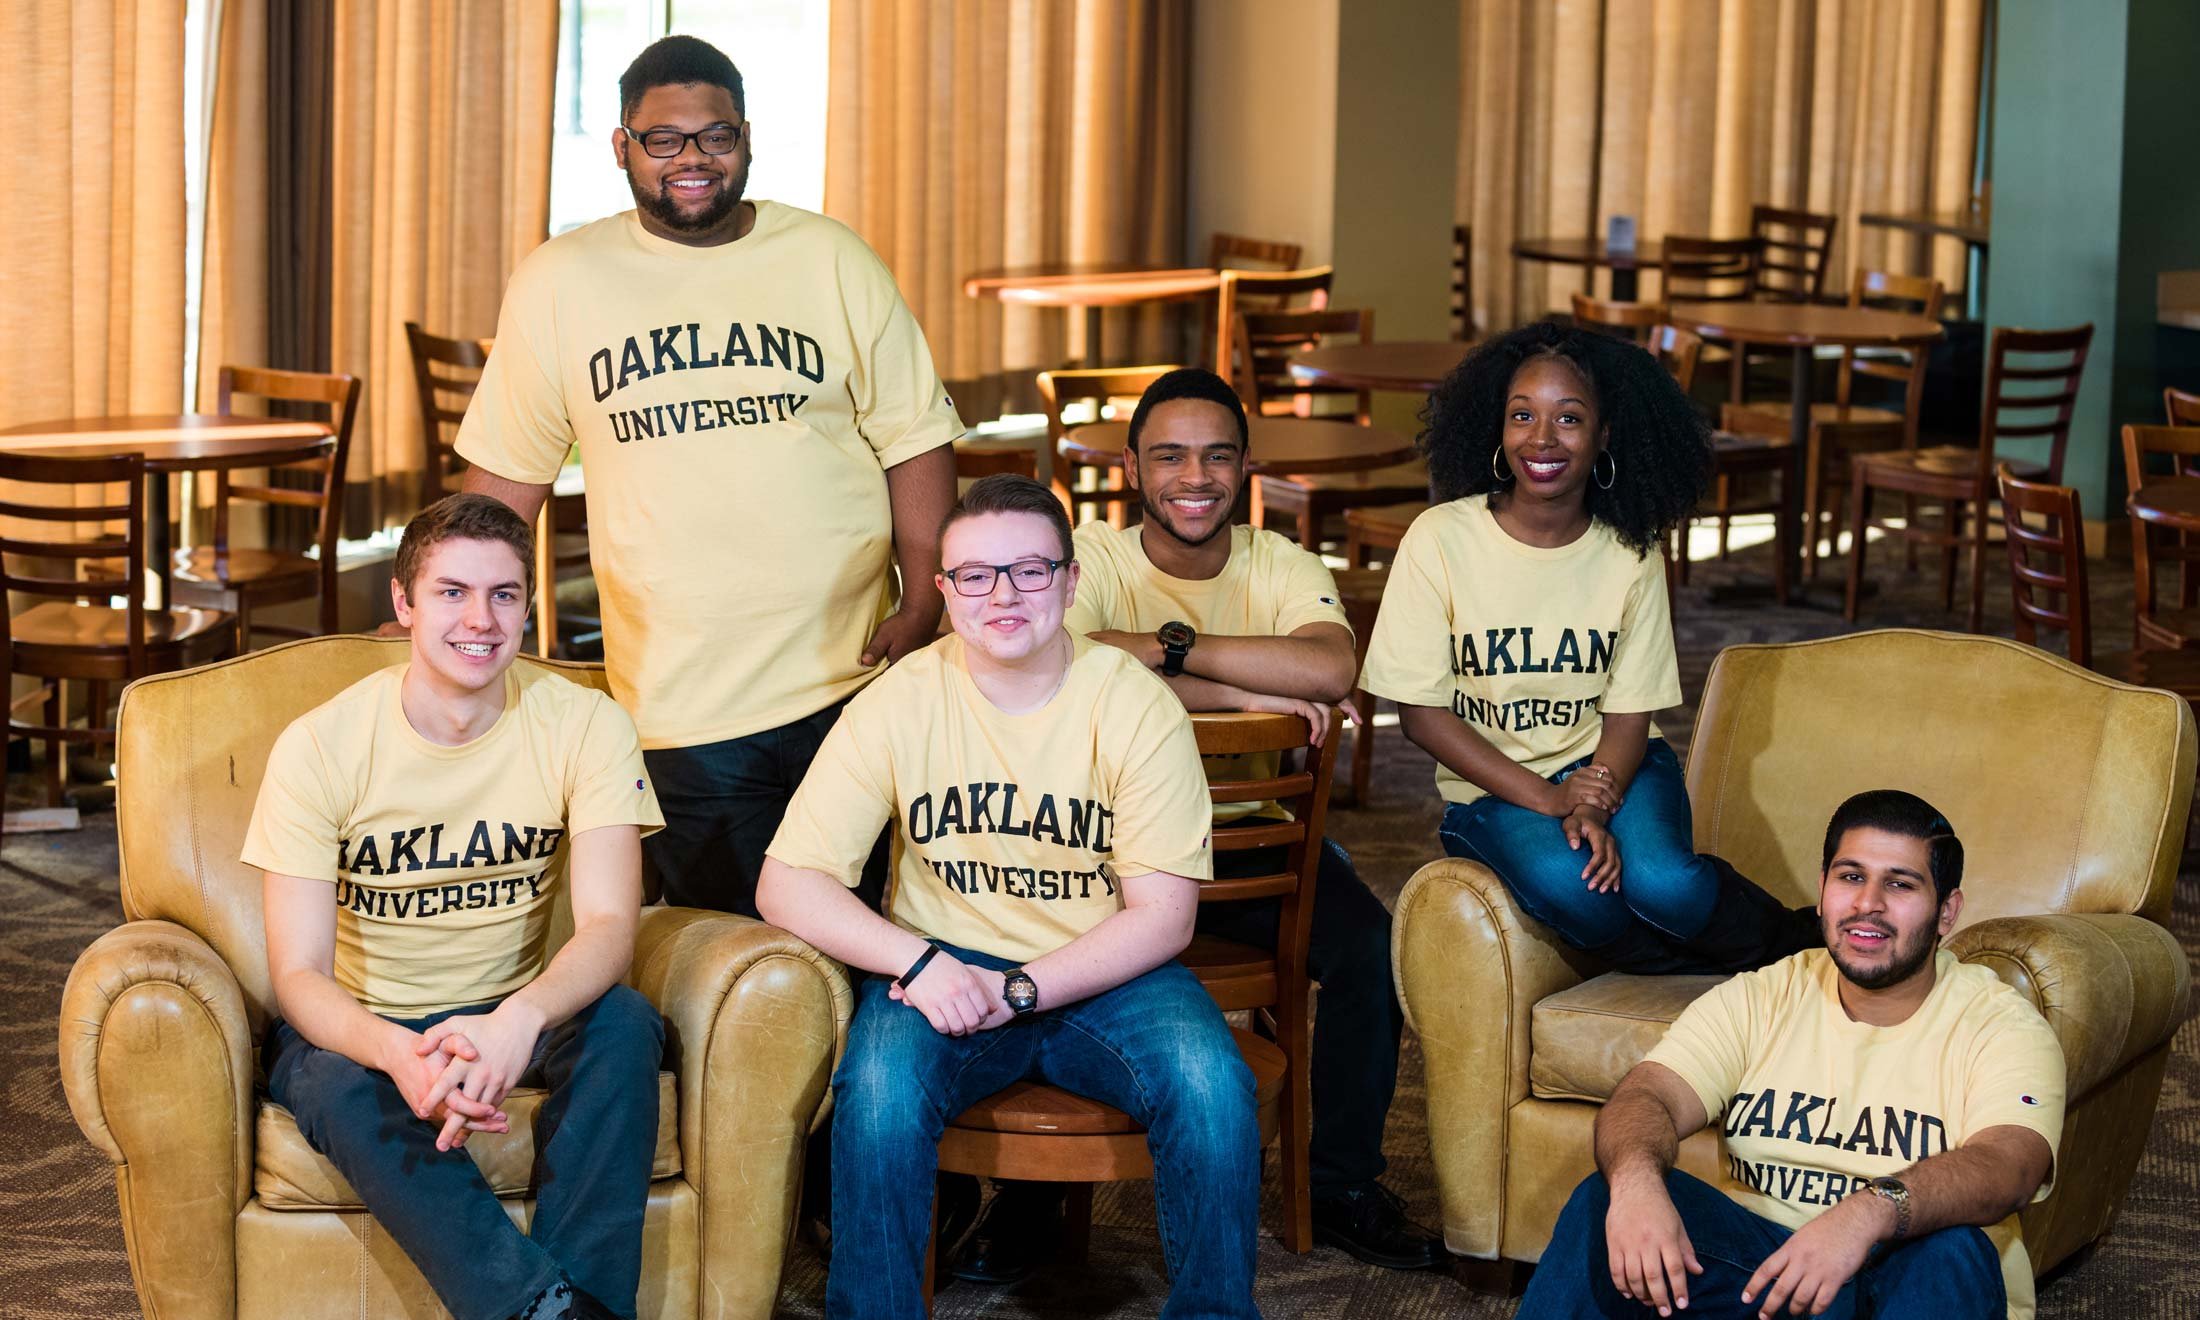 The 6 award recipients of the Oakland University 2017 Keeper of the Dream posing in a room with tables and chairs behind them